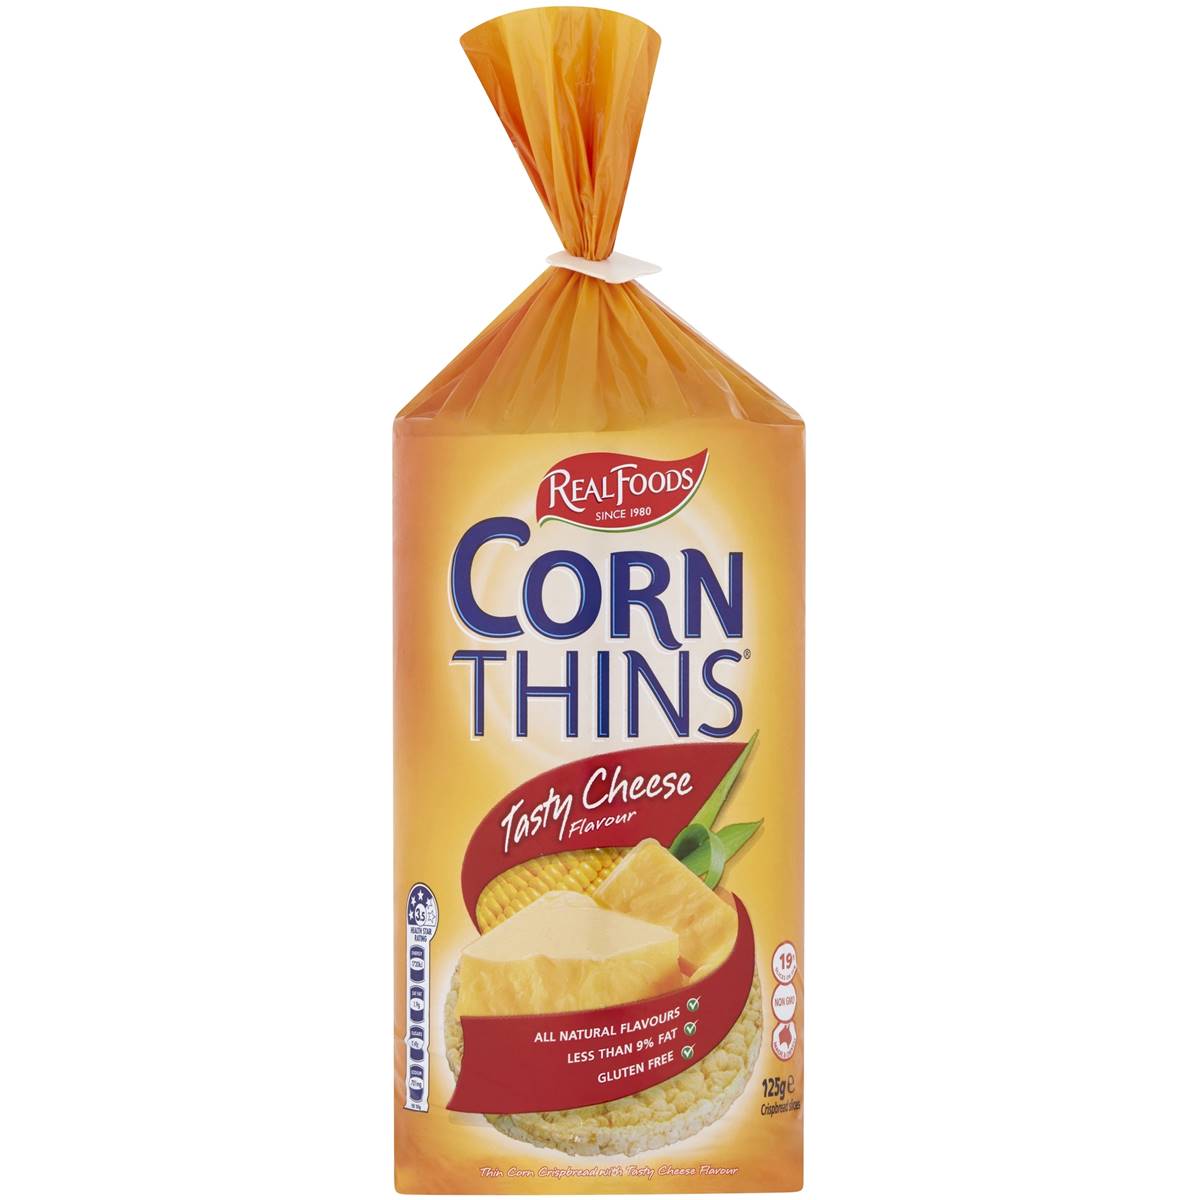 Real Foods Corn Thins Tasty Cheese 125g